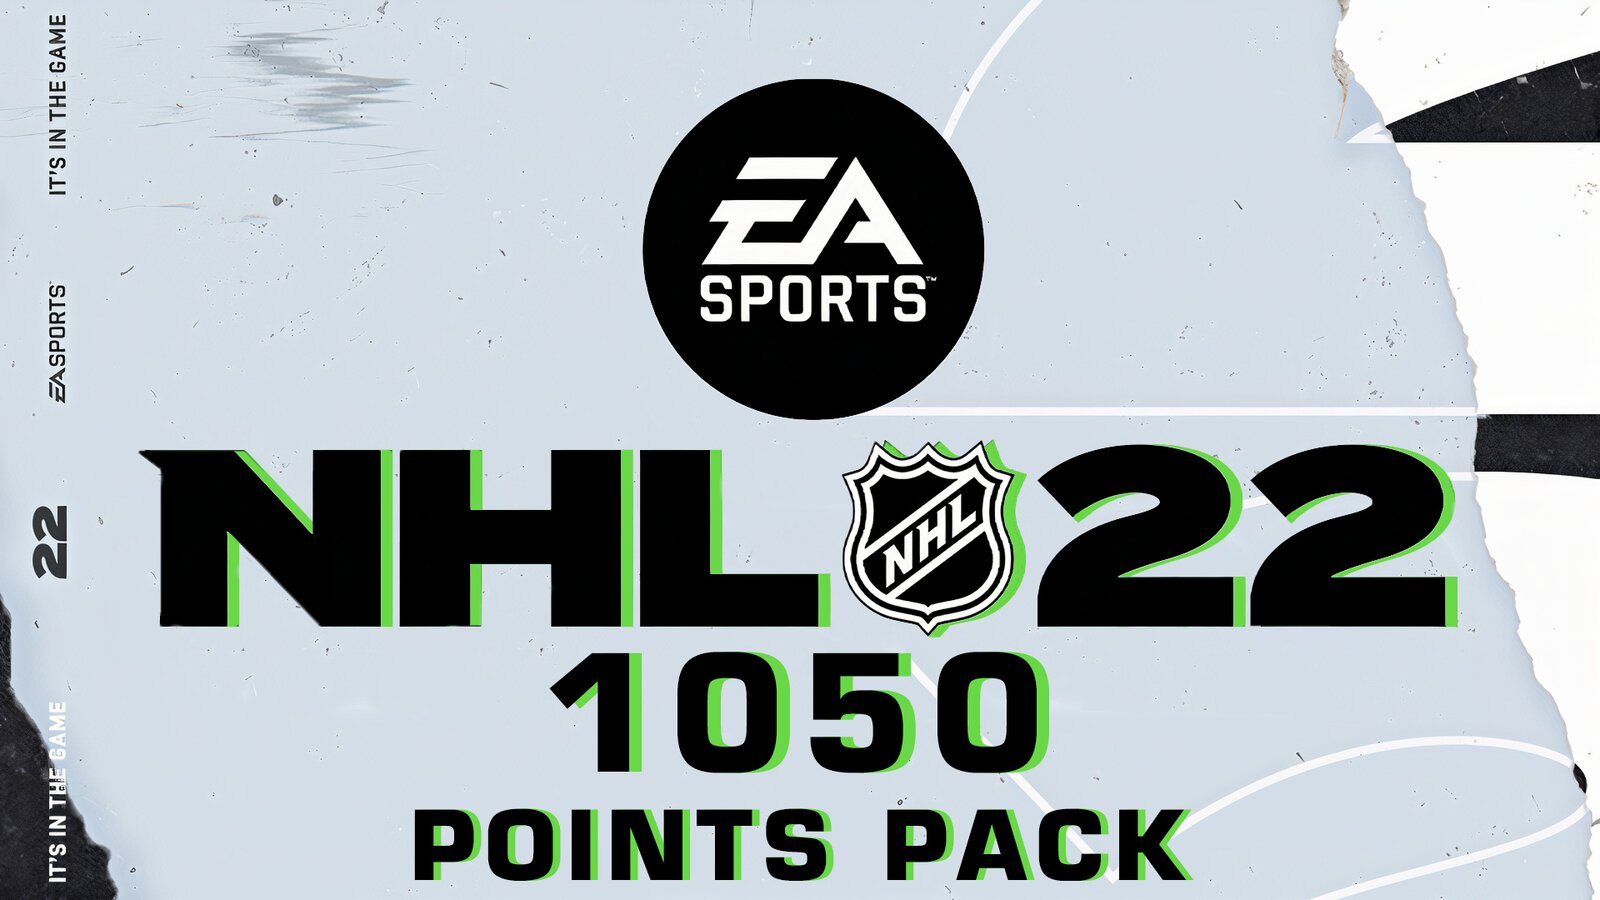 NHL 22 - 1050 Points Pack